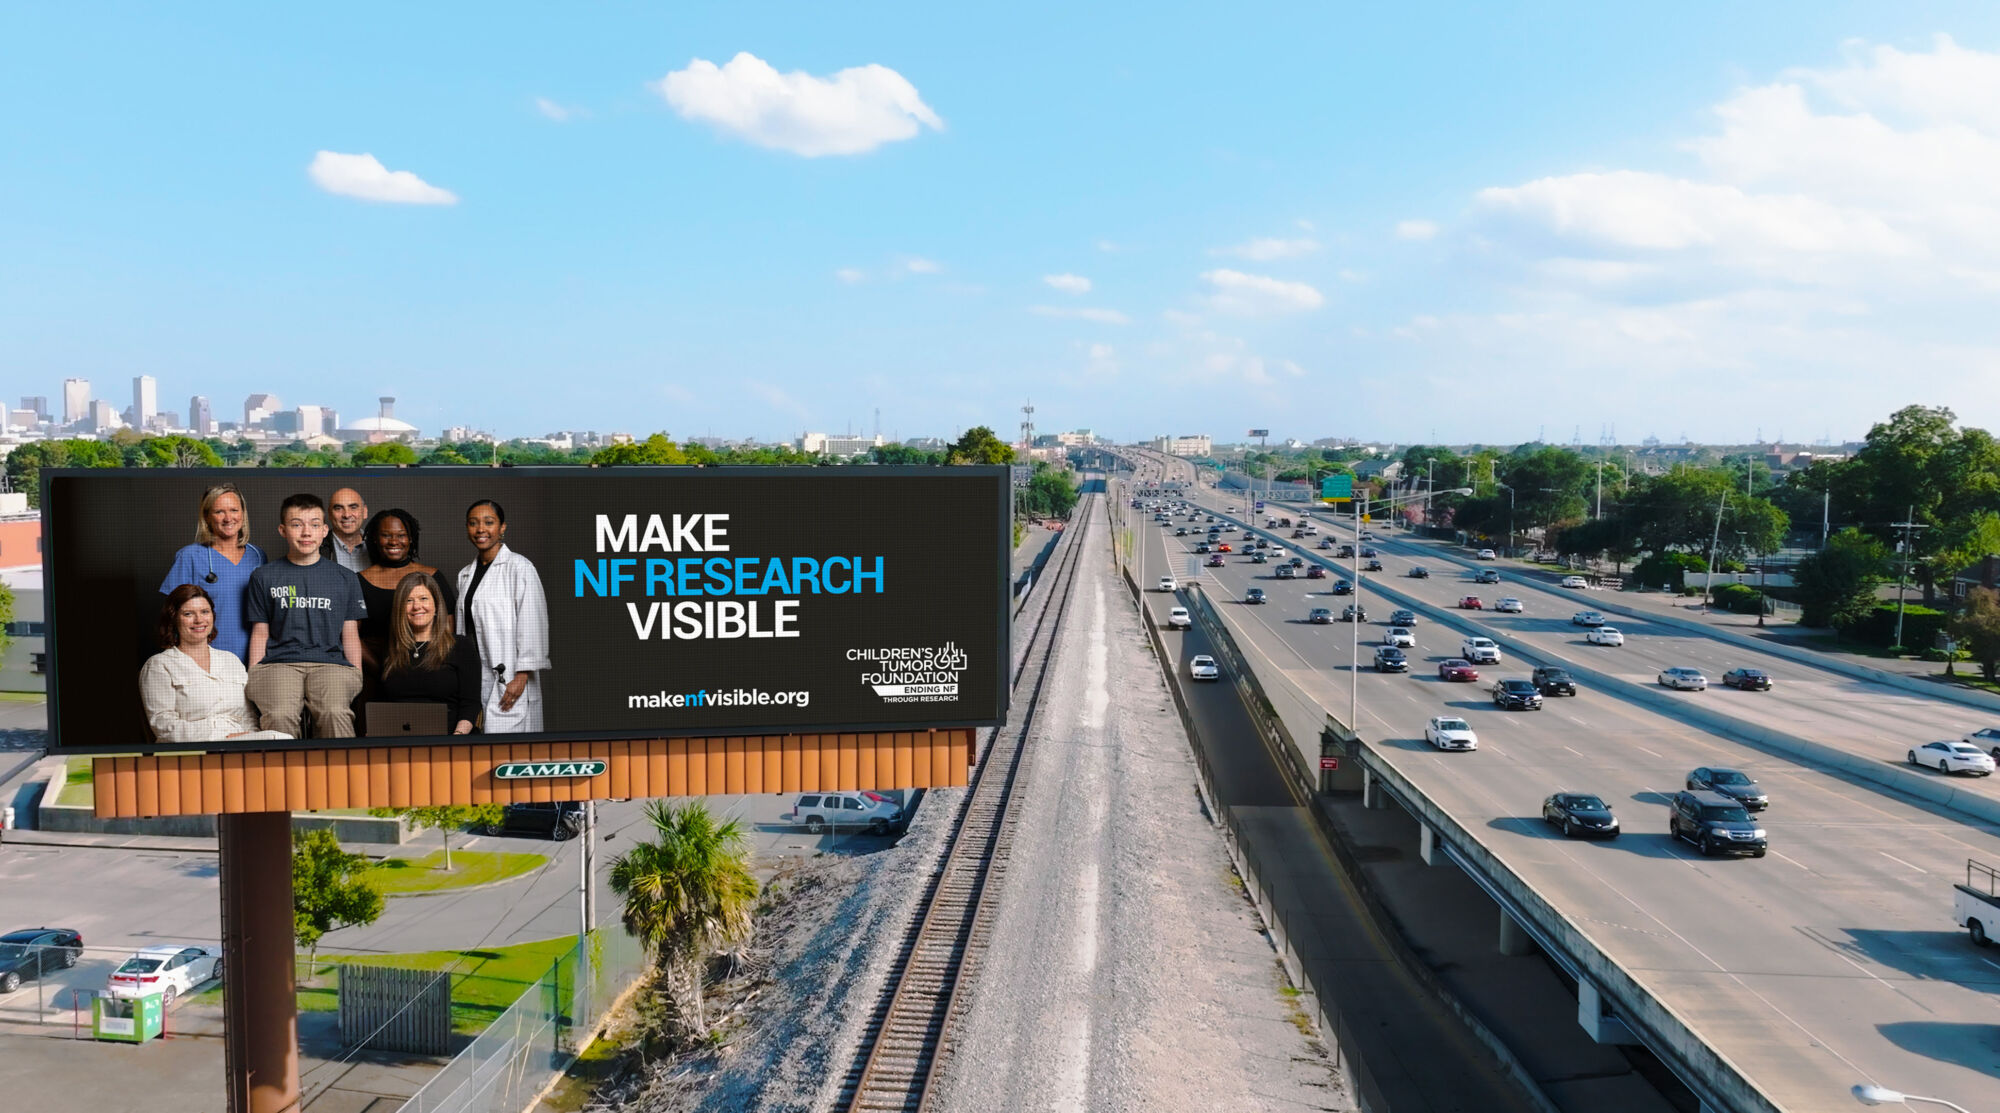 Billboard featuring a group of diverse people with the text "make nf research visible" beside a busy highway with city skyline in distance.